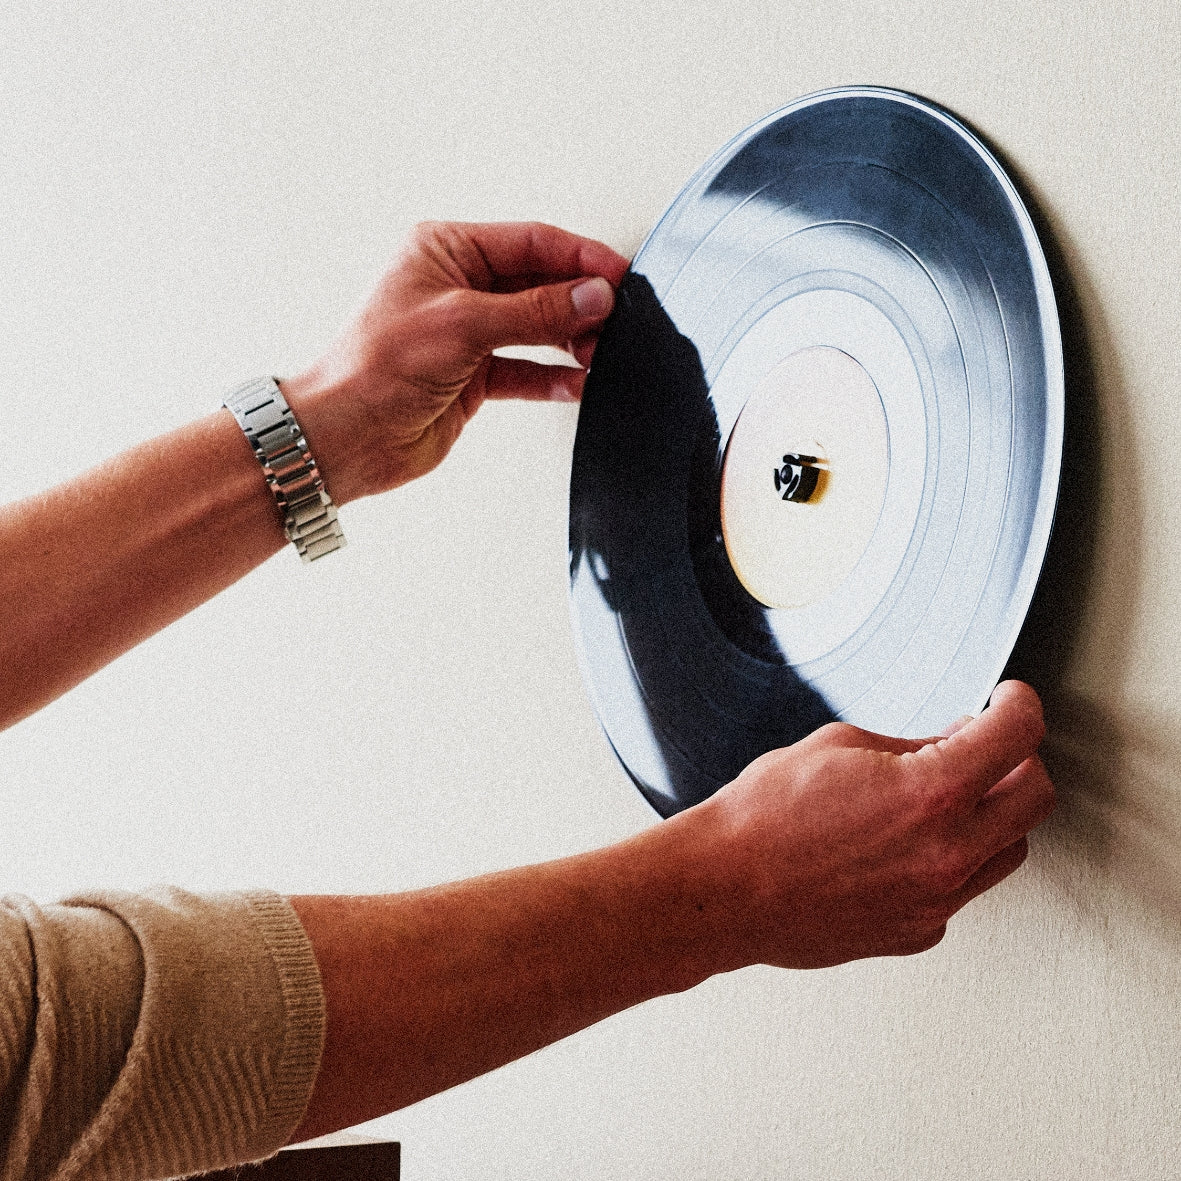 Hands holding a record up against the wall with the Twelve Inch Adapter